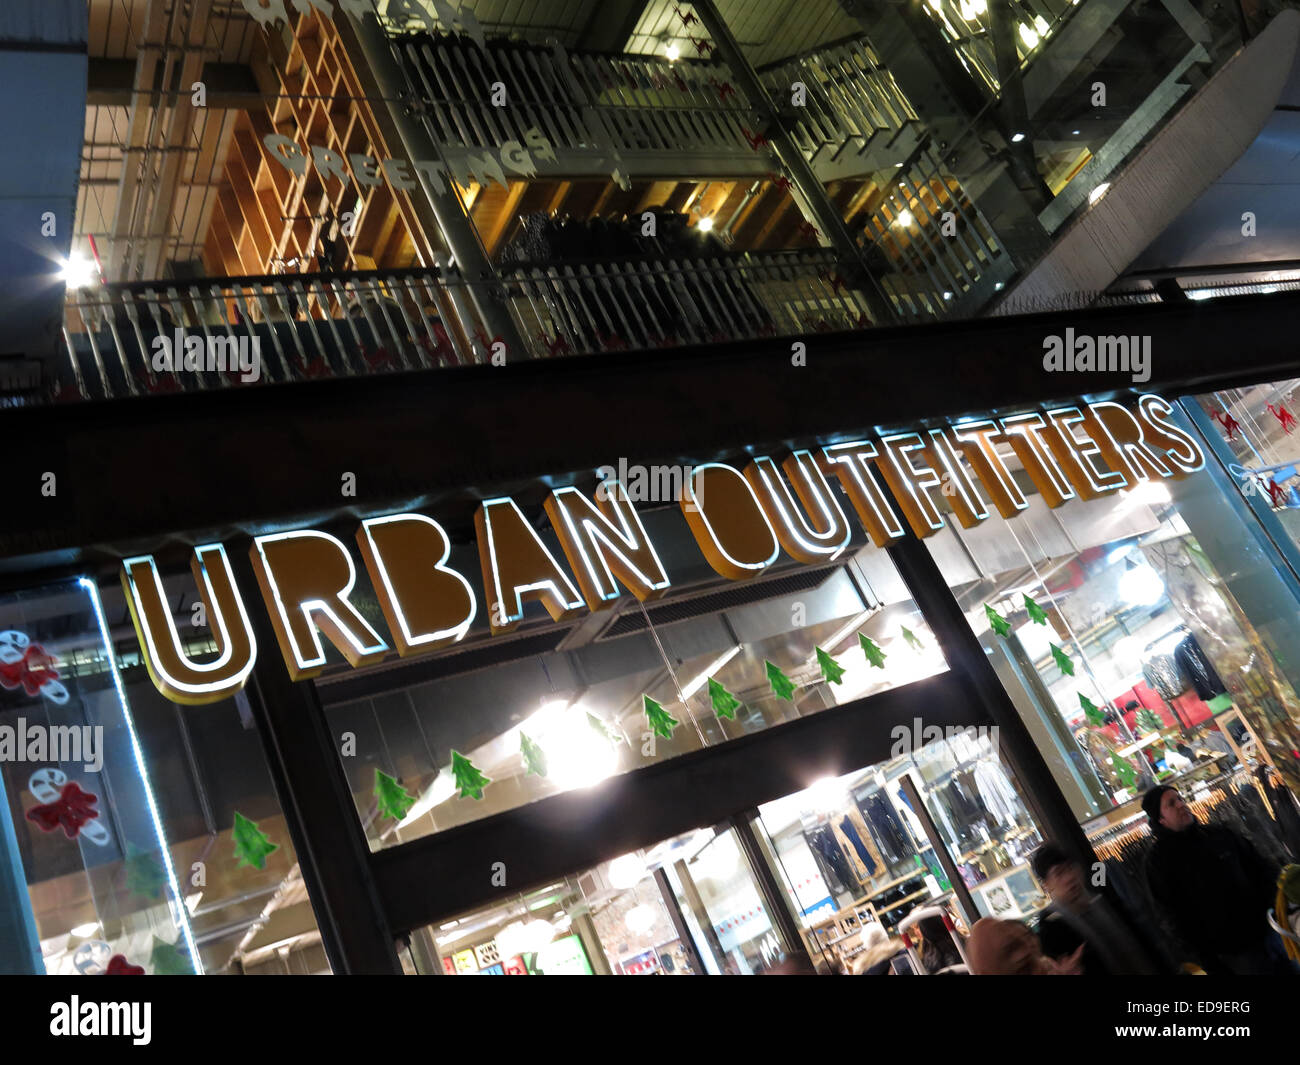 Urban Outfitters shopfront manchester at night Stock Photo